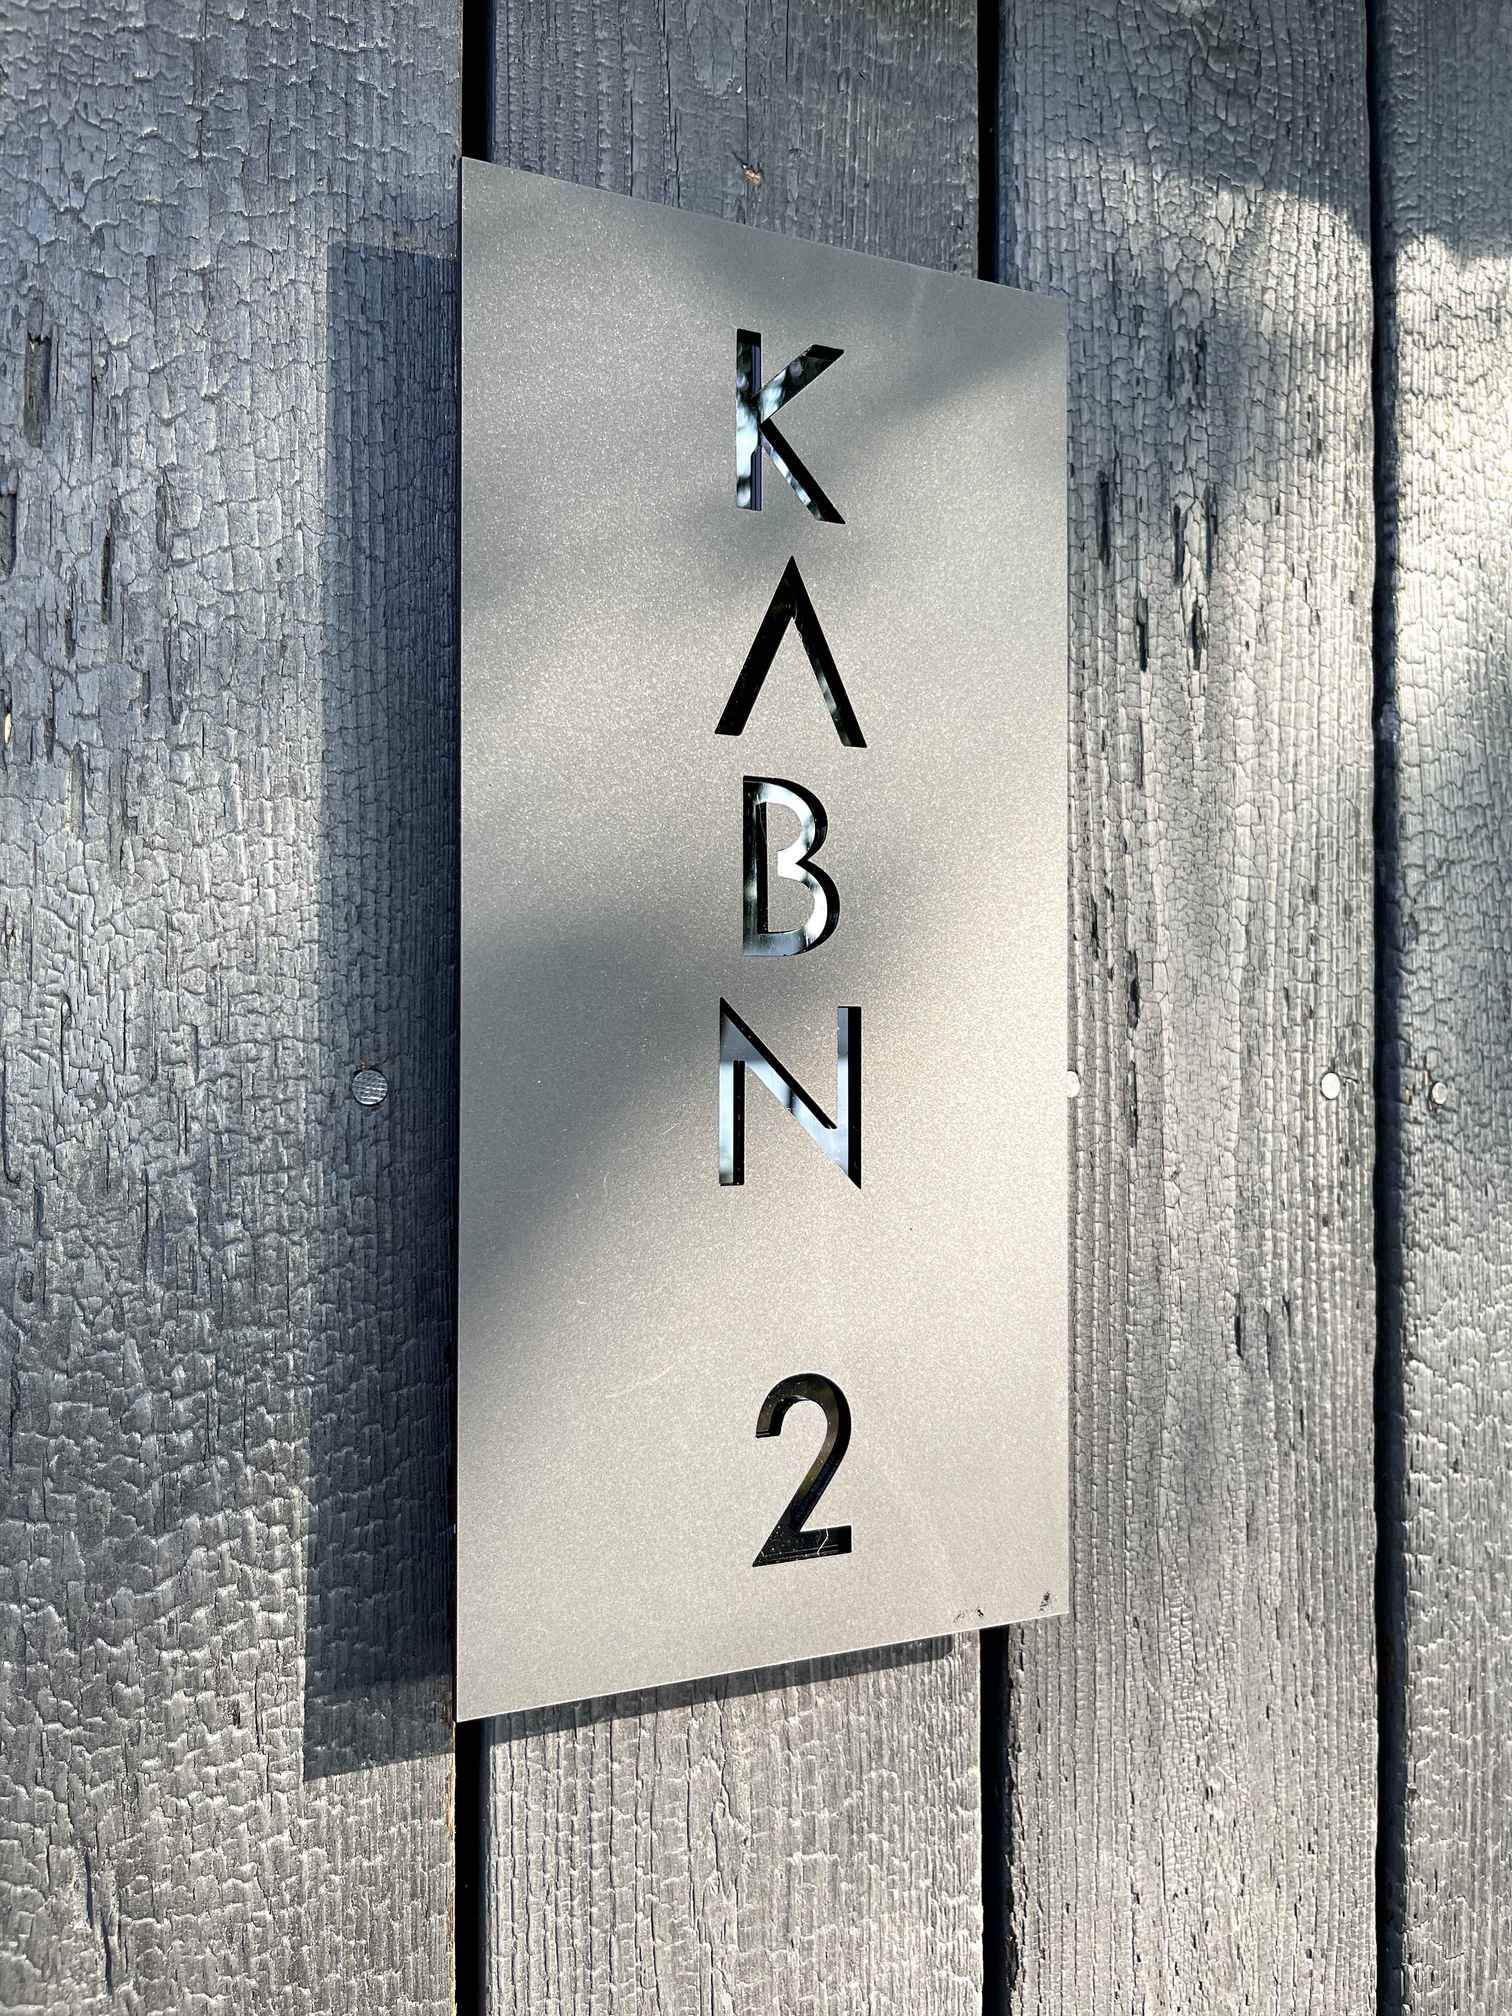 Kabn sign on charred timber.